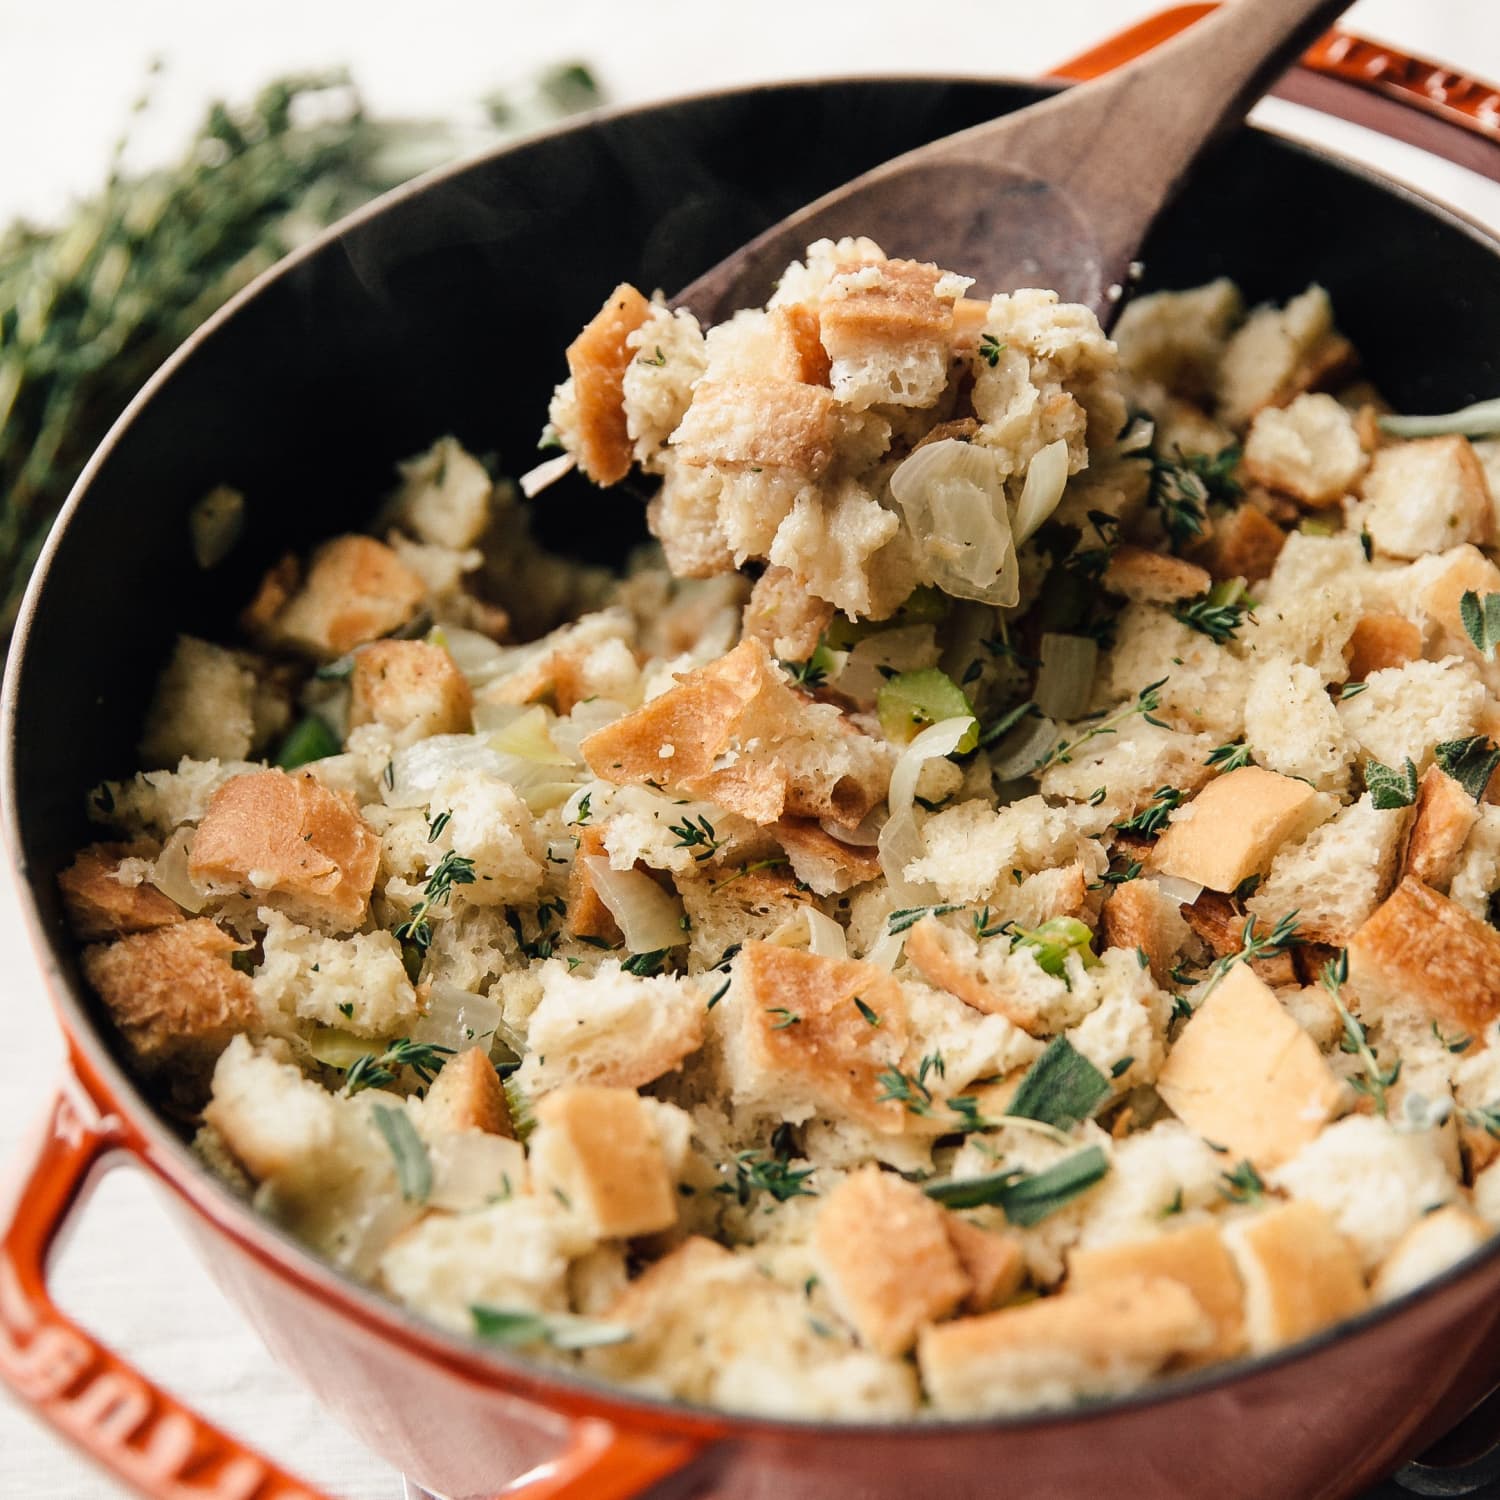 Stovetop Stuffing Recipe - How to Make Stuffing on the Stove